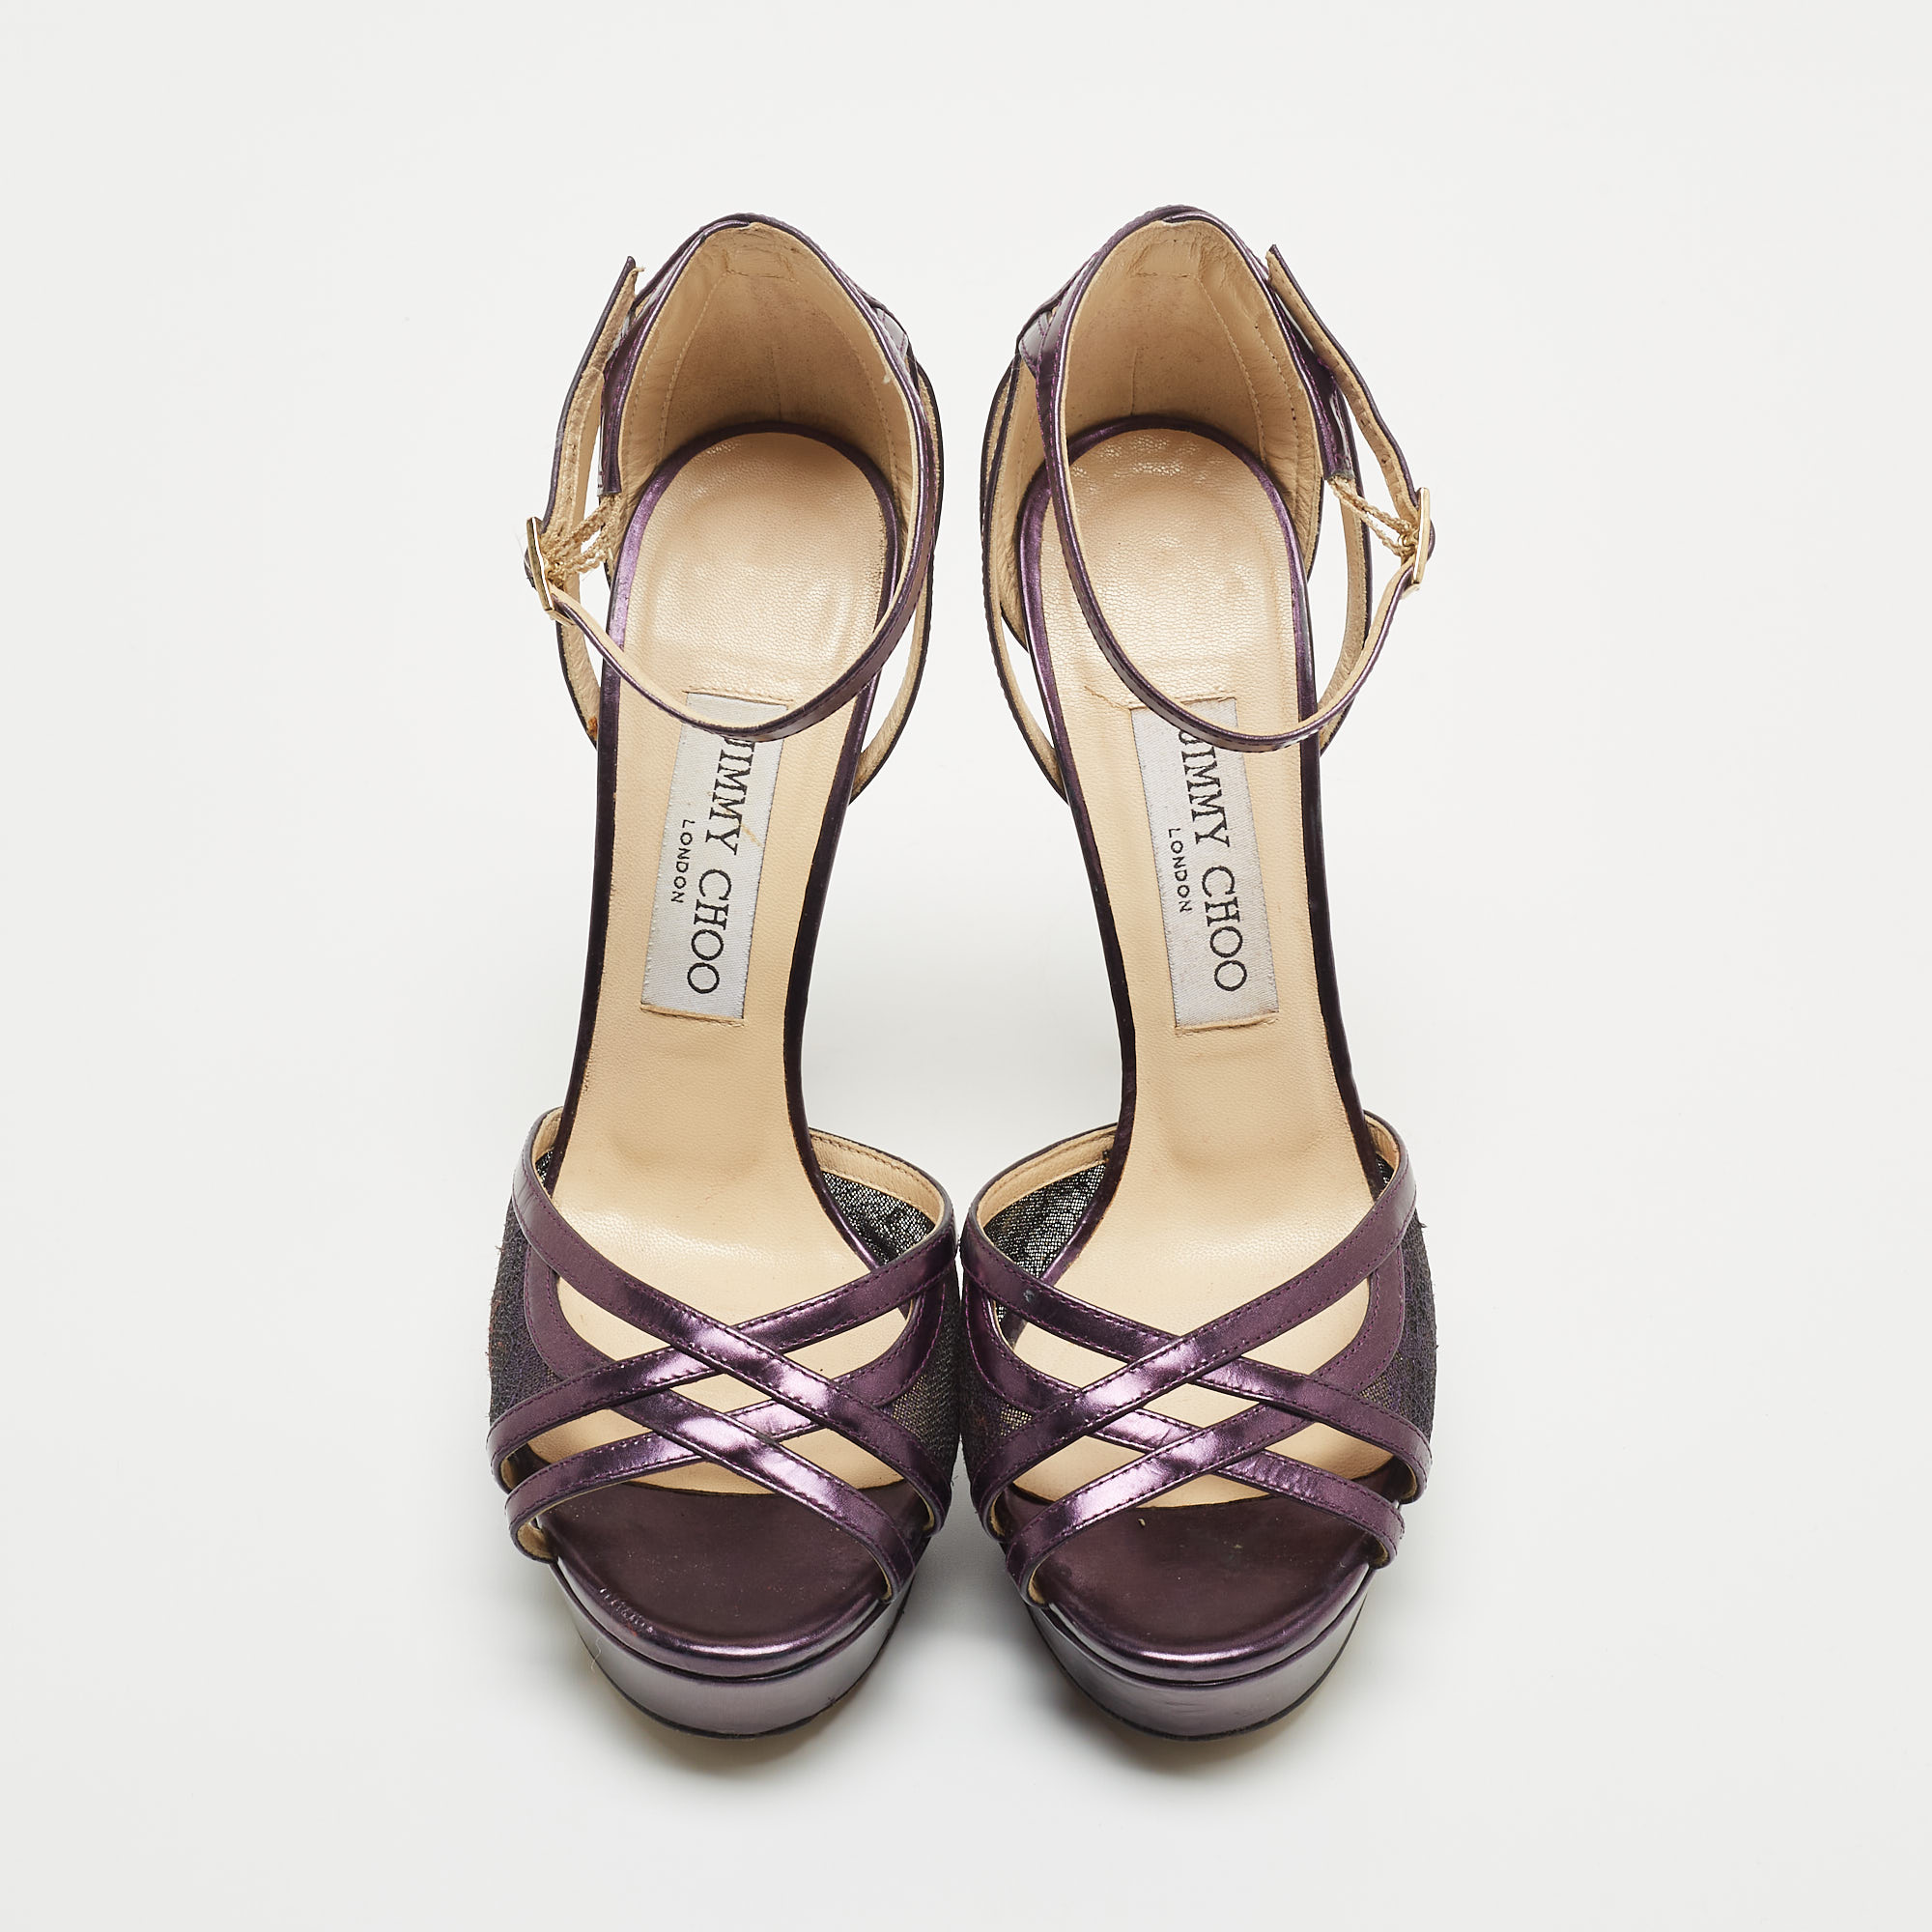 Jimmy Choo Purple Lace And Leather Laurita Sandals Size 37.5